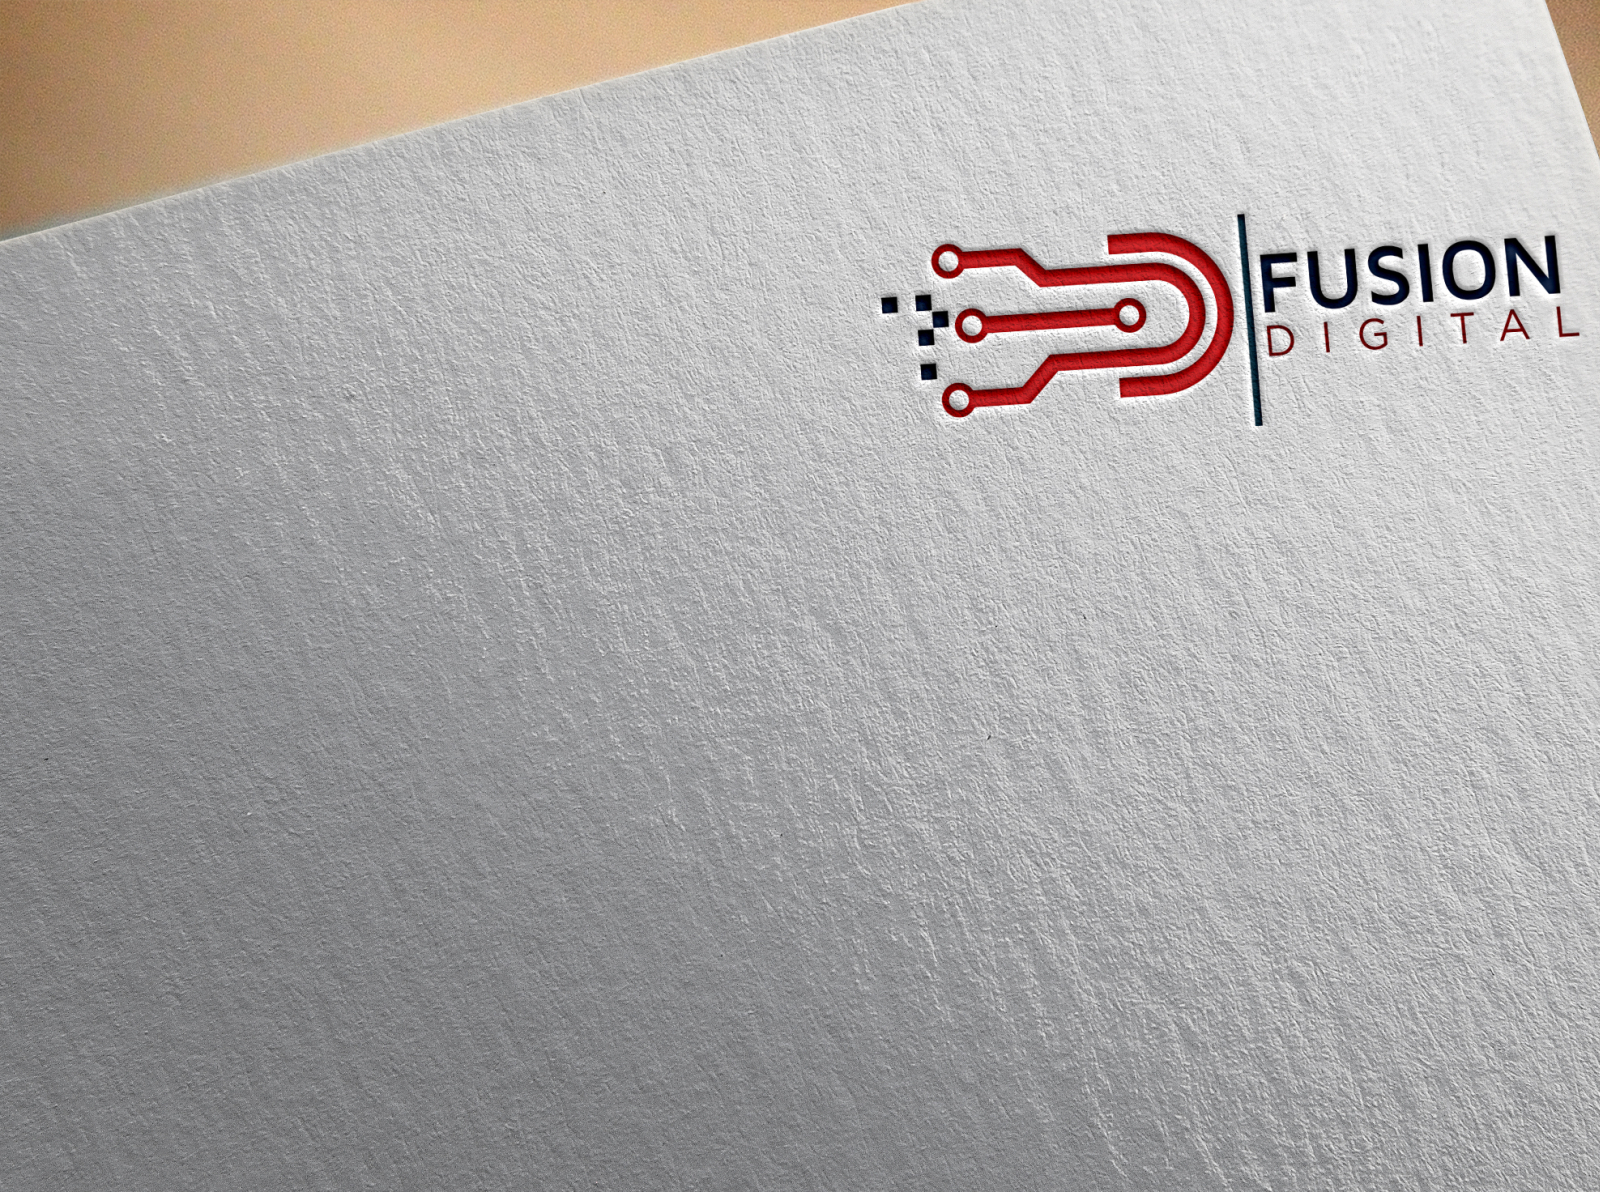 Download 01 Logo Mockup By Punedesign 2 By Ah Sohag On Dribbble PSD Mockup Templates